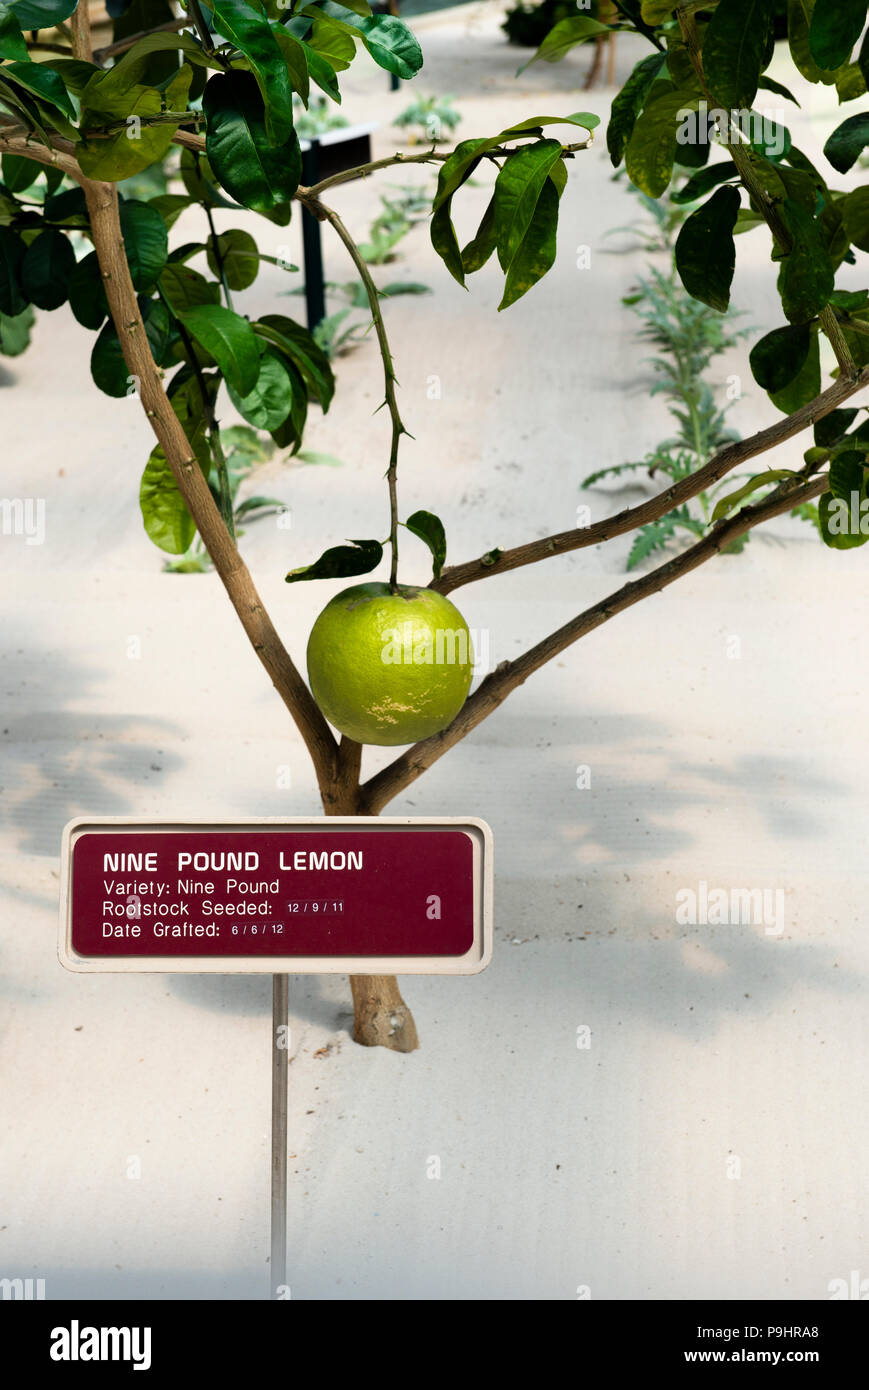 9 pound lemon growing in the experimental agriculture section of Epcot Center, The Land Pavilion, Behind the Seeds Tour. Orlando. Giant Lemon. Stock Photo